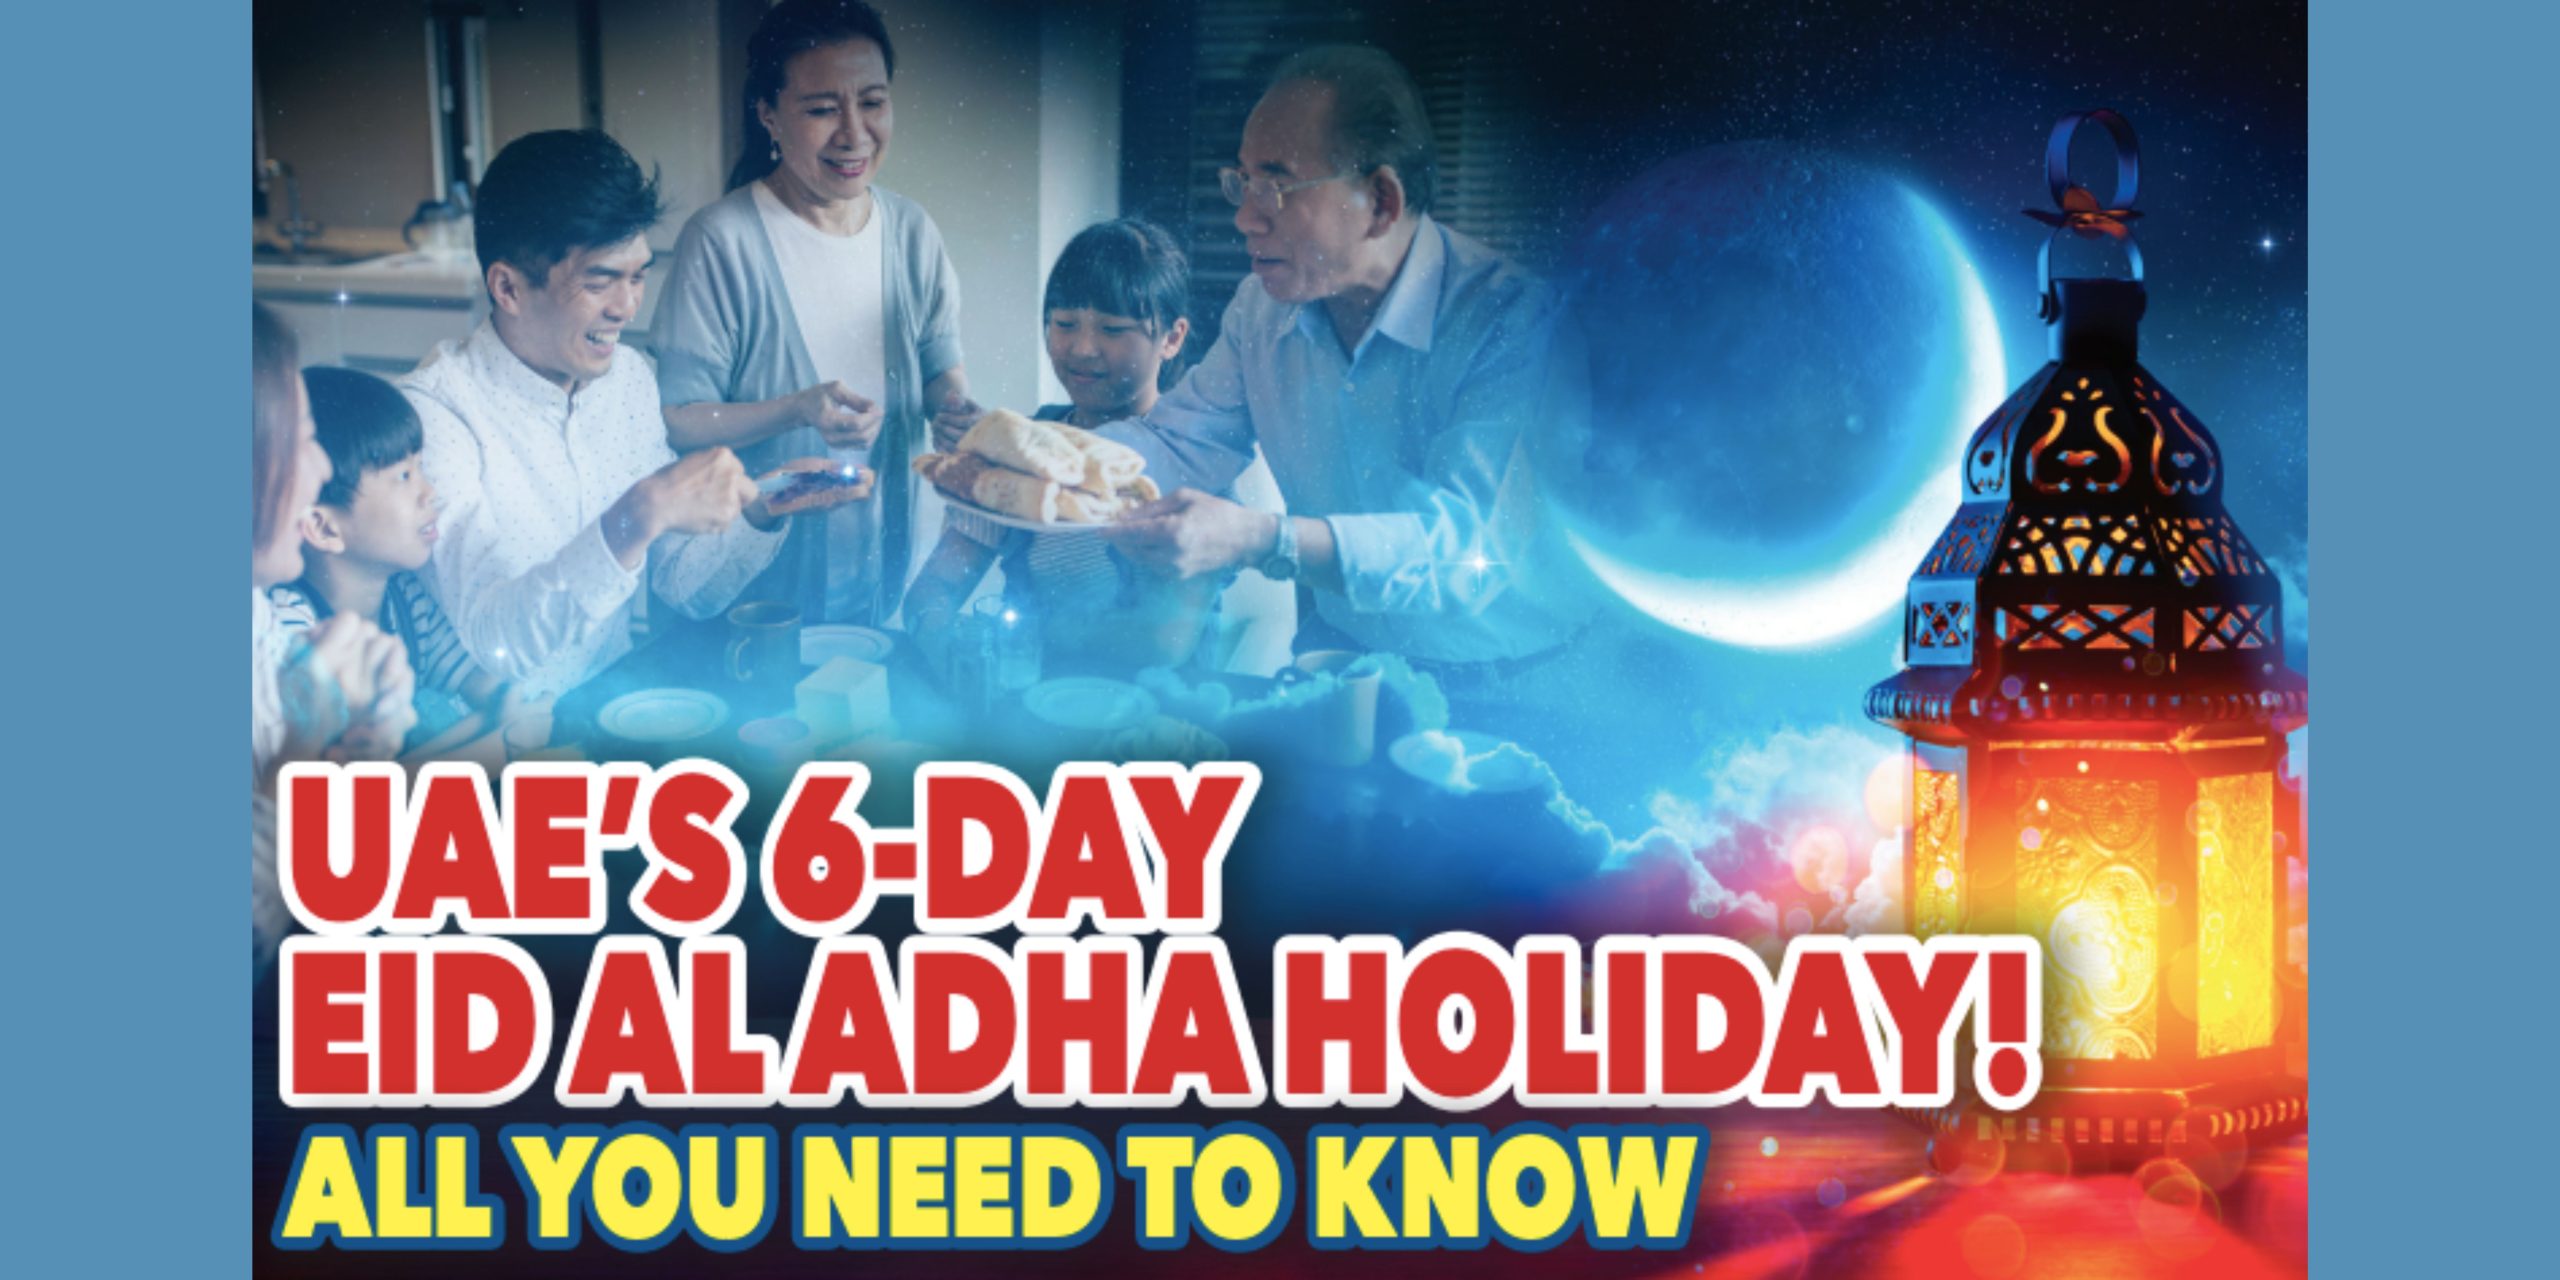 UAE’s 6day Eid Al Adha holiday! All you need to know The Filipino Times